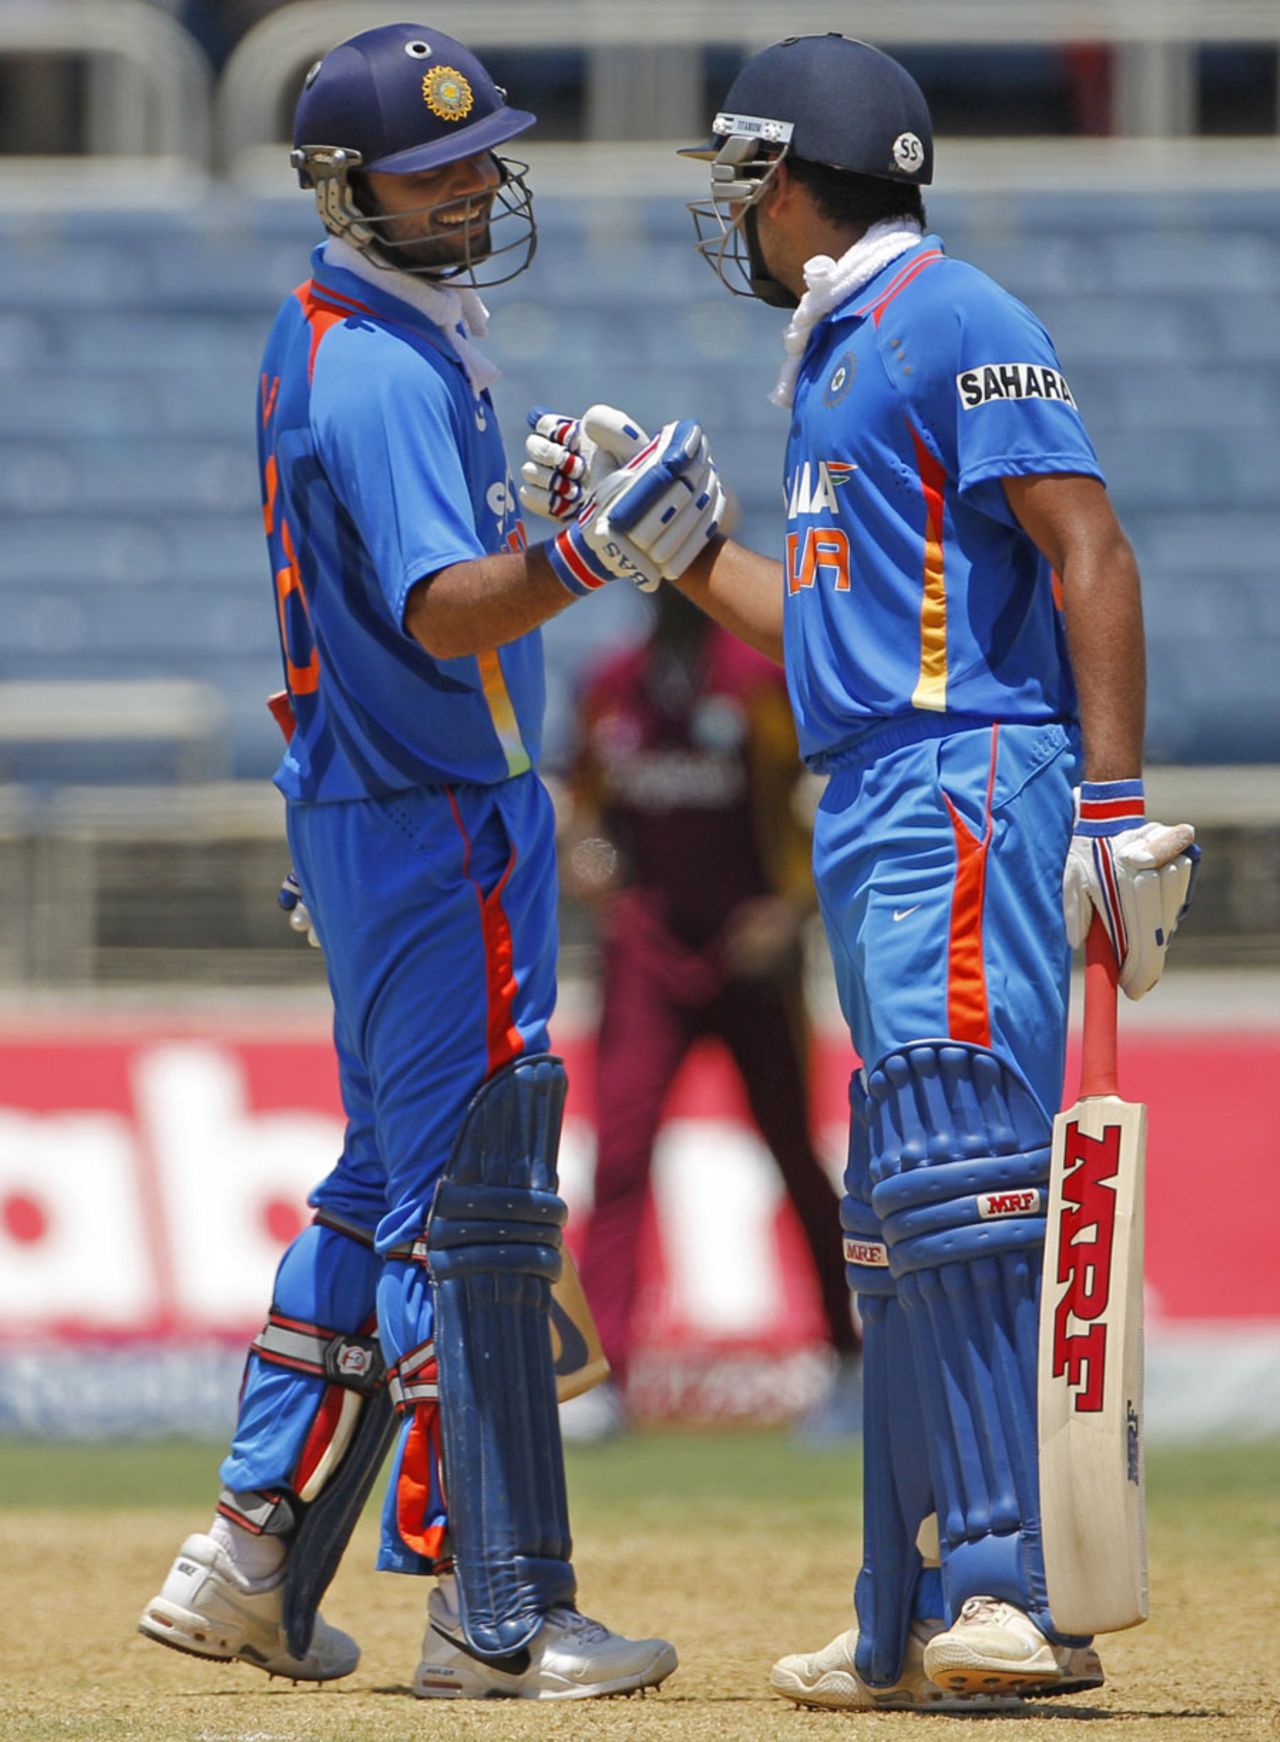 Virat Kohli and Rohit Sharma added 110 for the fourth wicket, West Indies v India, 5th ODI, Kingston, Jamaica, June 16, 2011